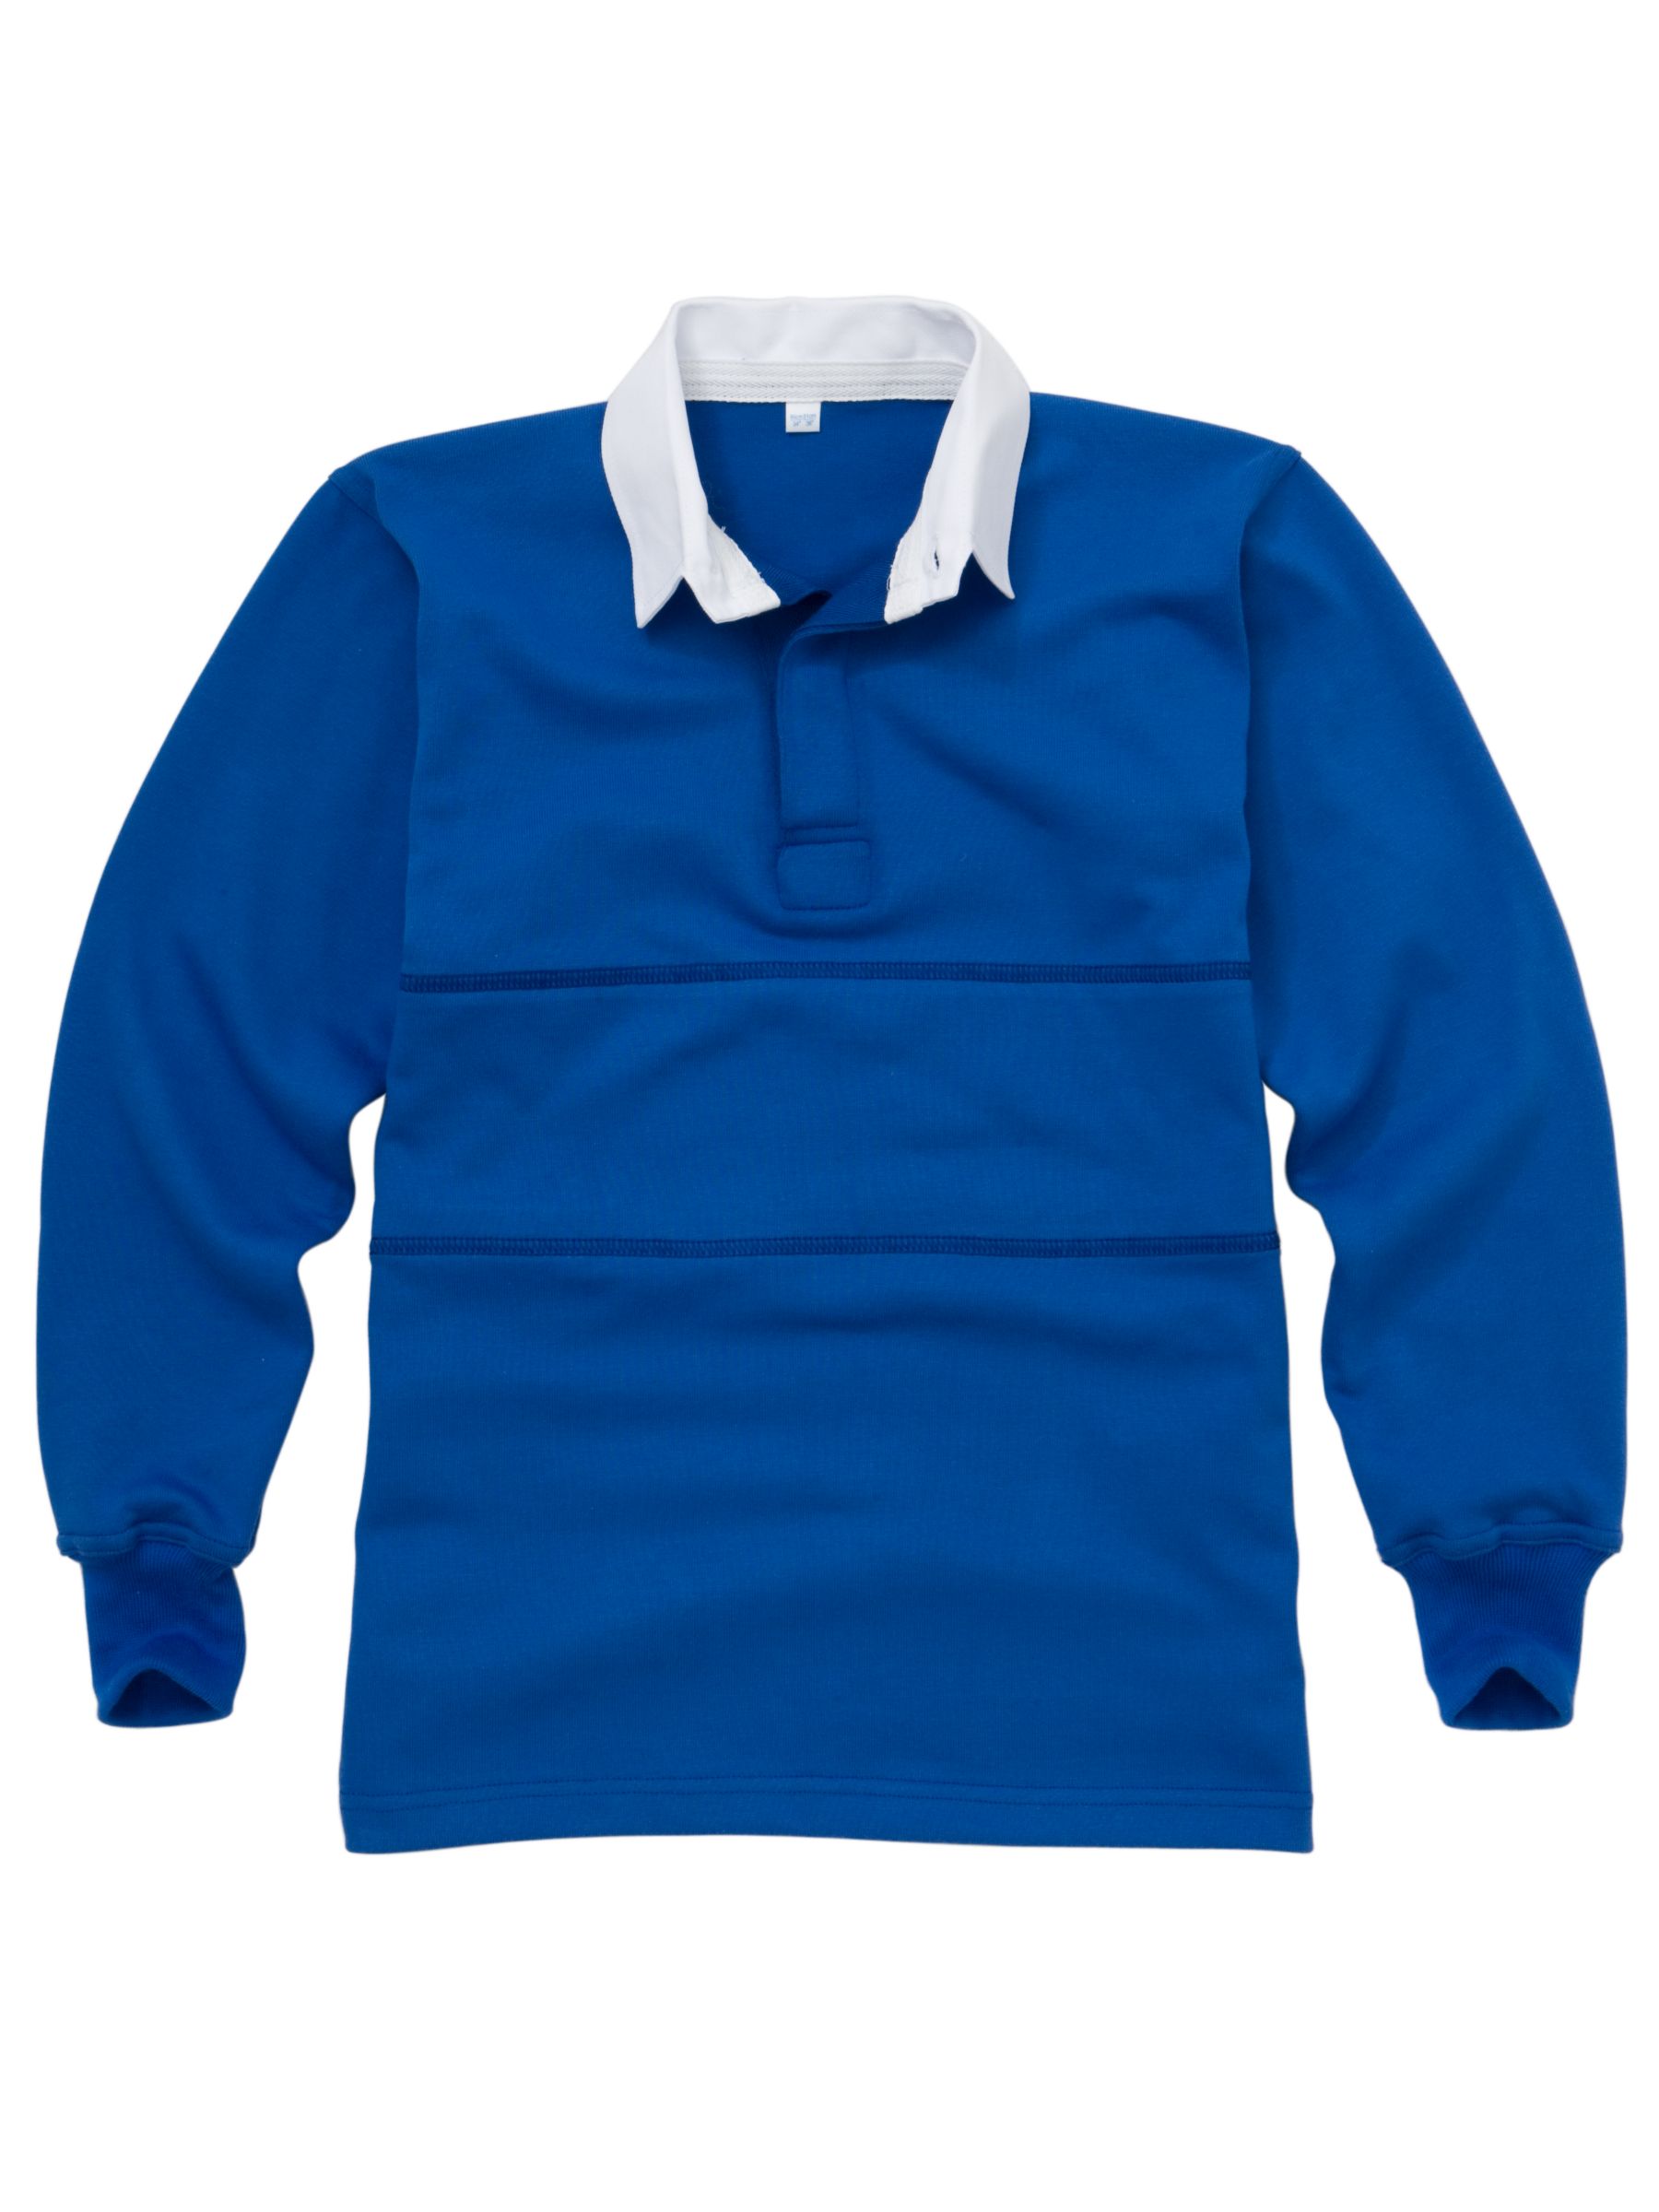 Other Schools School Sports Rugby Shirt, Royal Blue